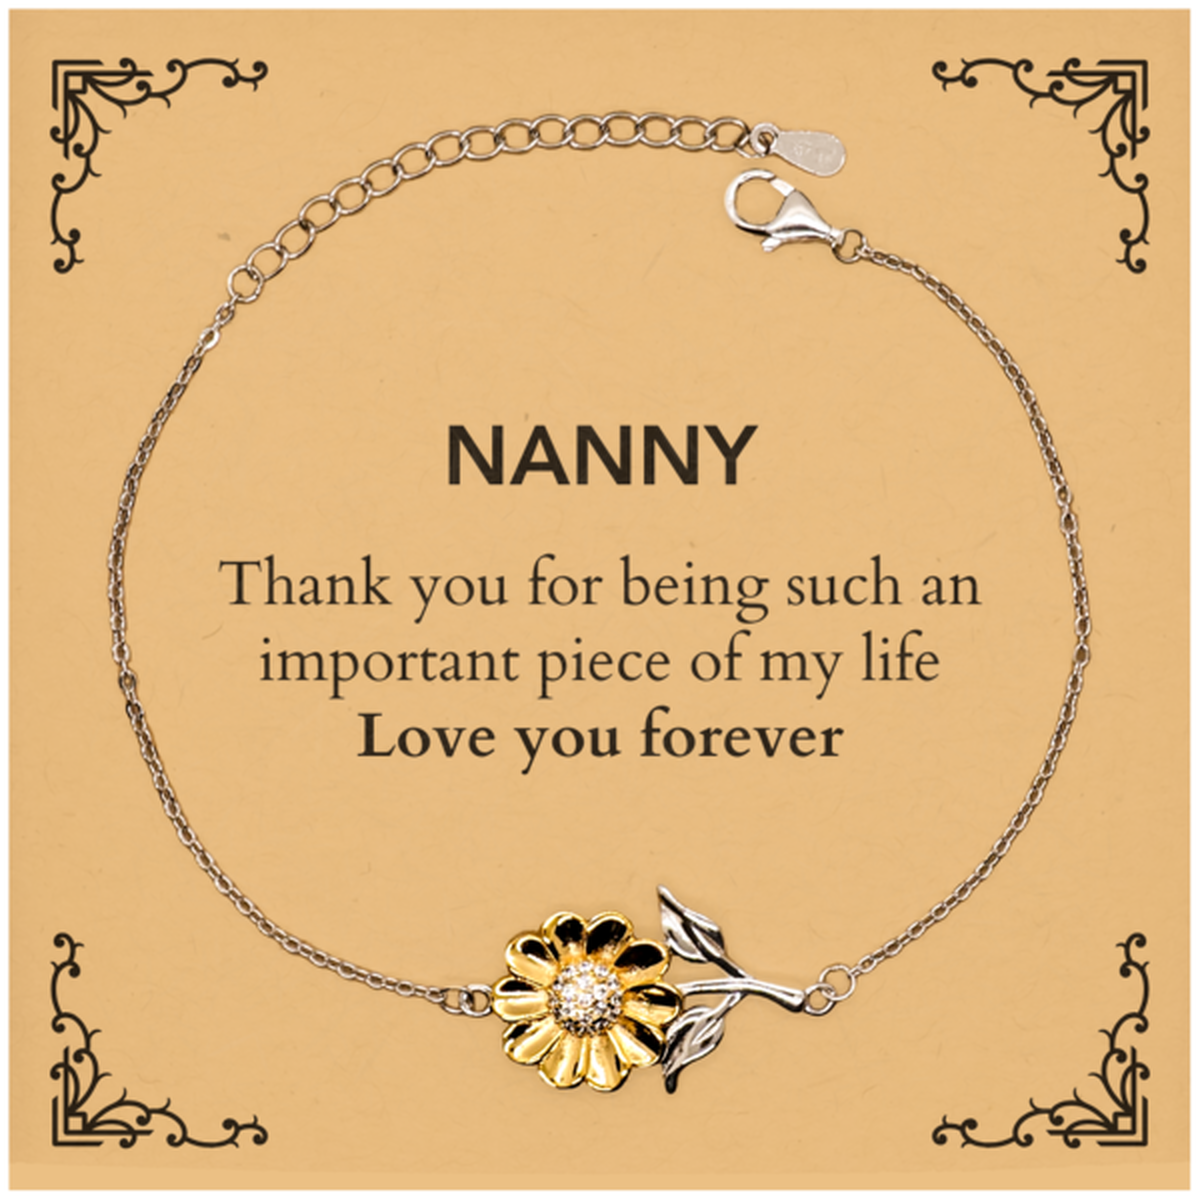 Appropriate Nanny Sunflower Bracelet Epic Birthday Gifts for Nanny Thank you for being such an important piece of my life Nanny Christmas Mothers Fathers Day